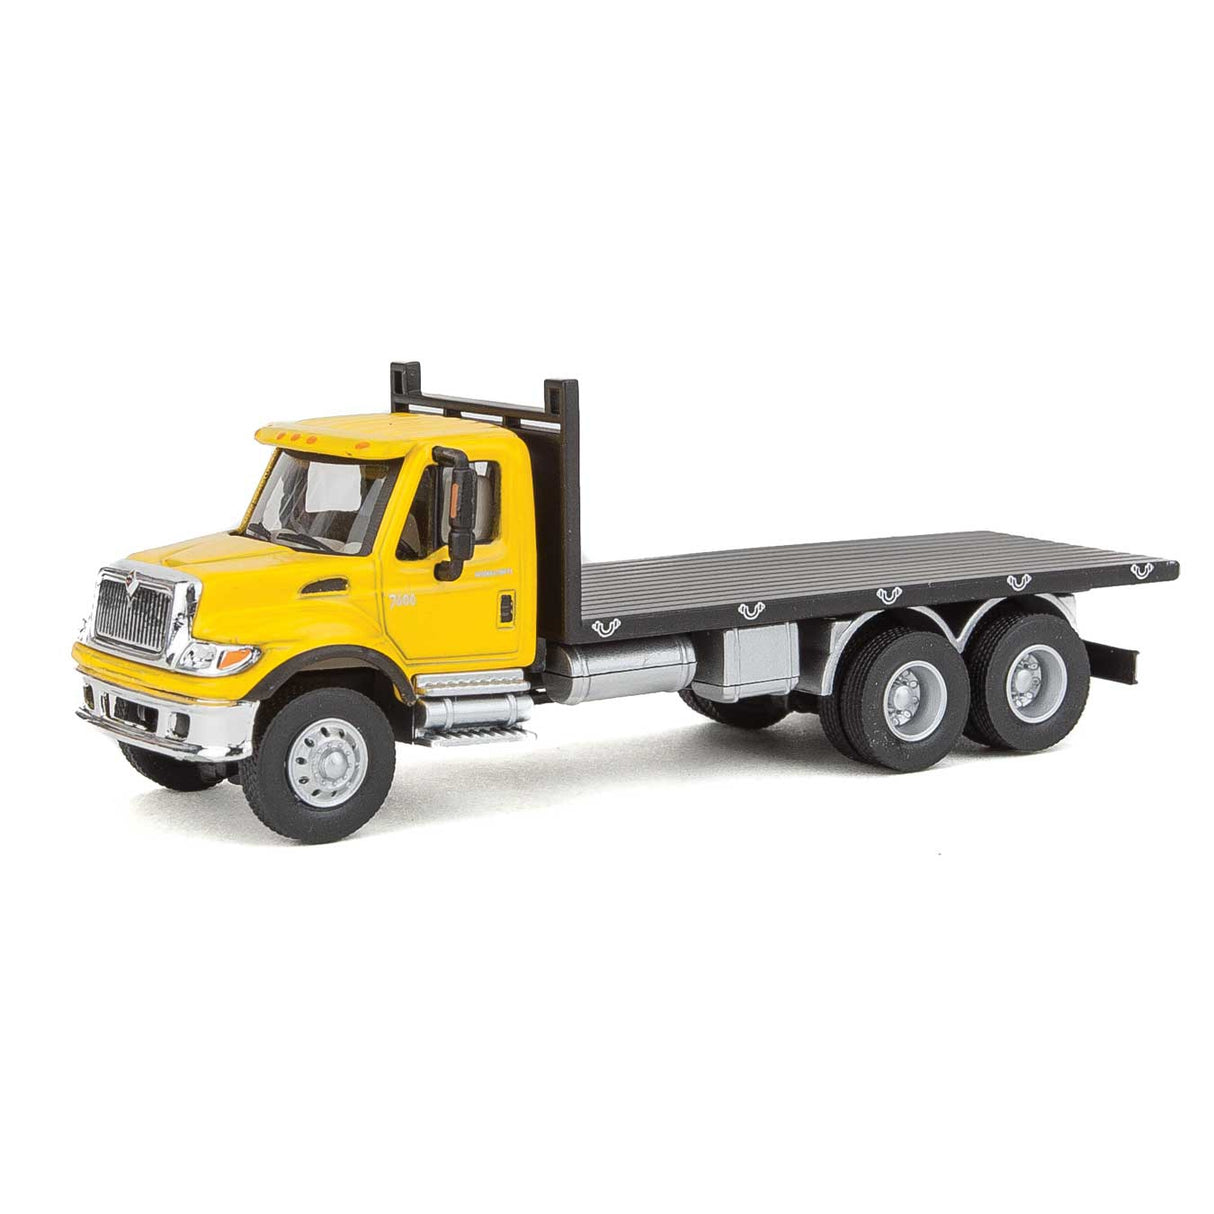 Walthers International(R) 7600 3-Axle Flatbed Truck - Assembled -- Yellow Cab, Black Flatbed